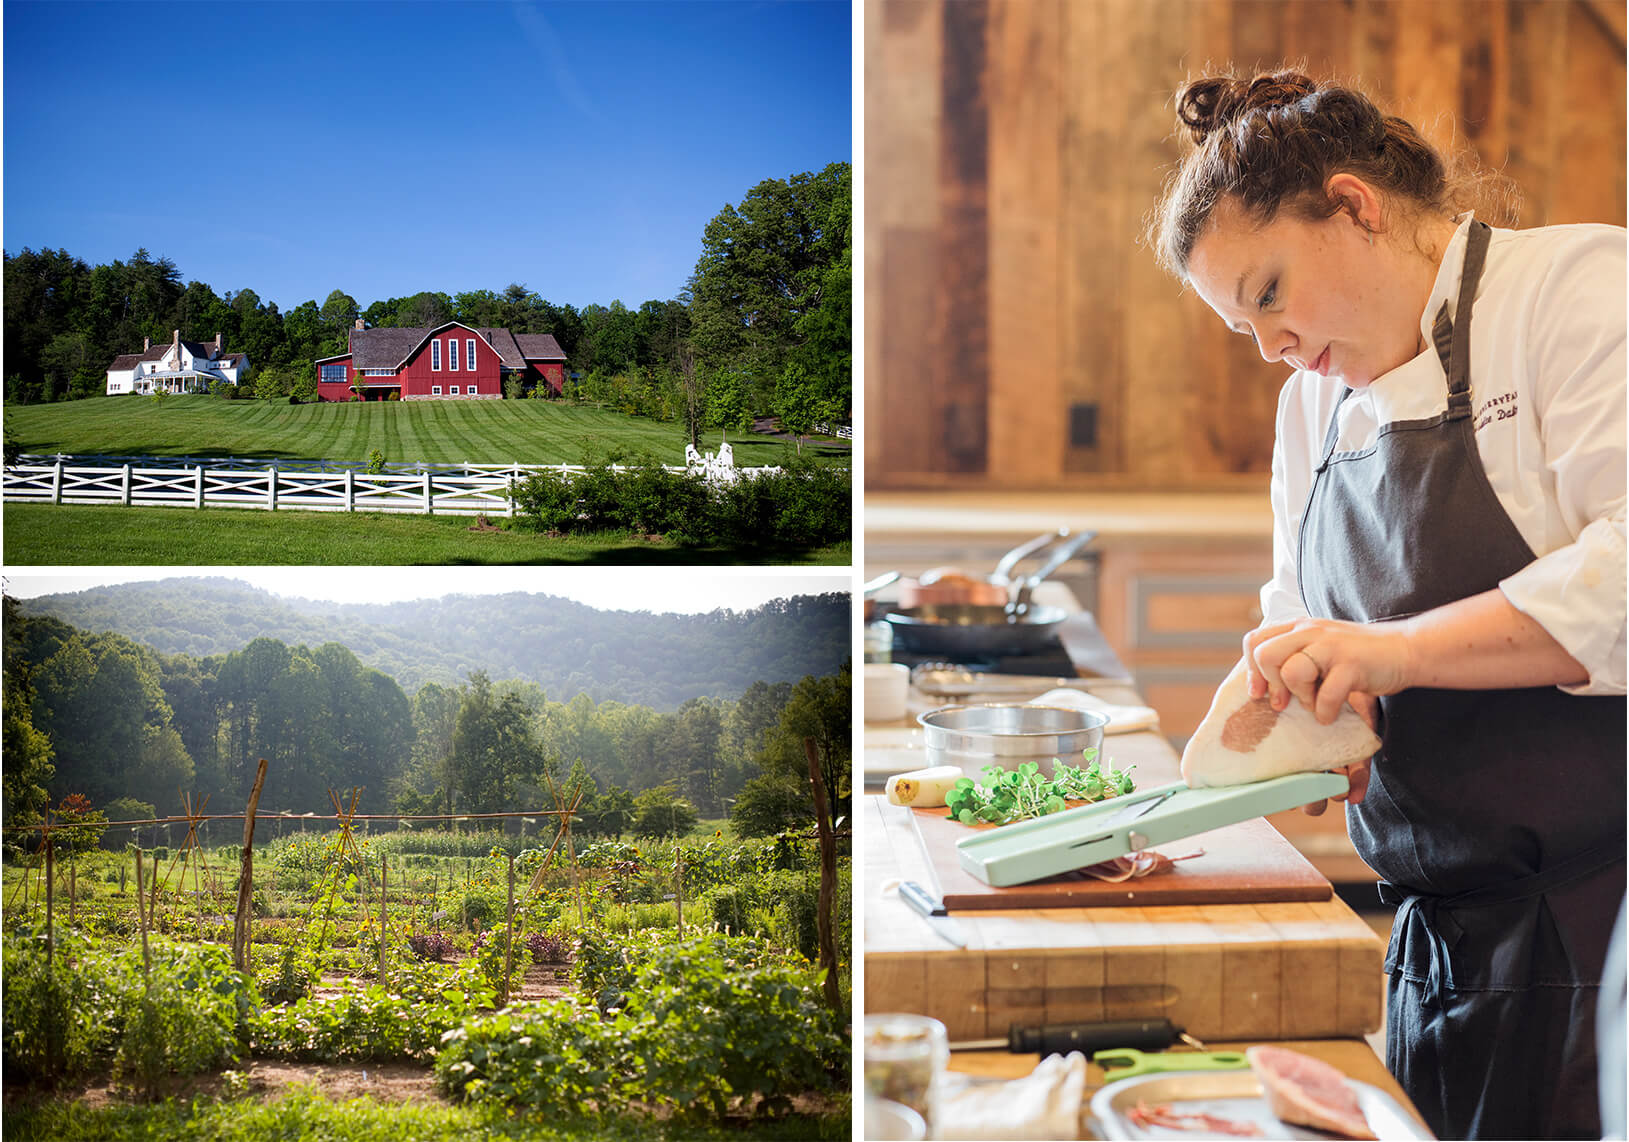 Eating Your Way Through Your Next Holiday: A New Crop of Cooking Schools